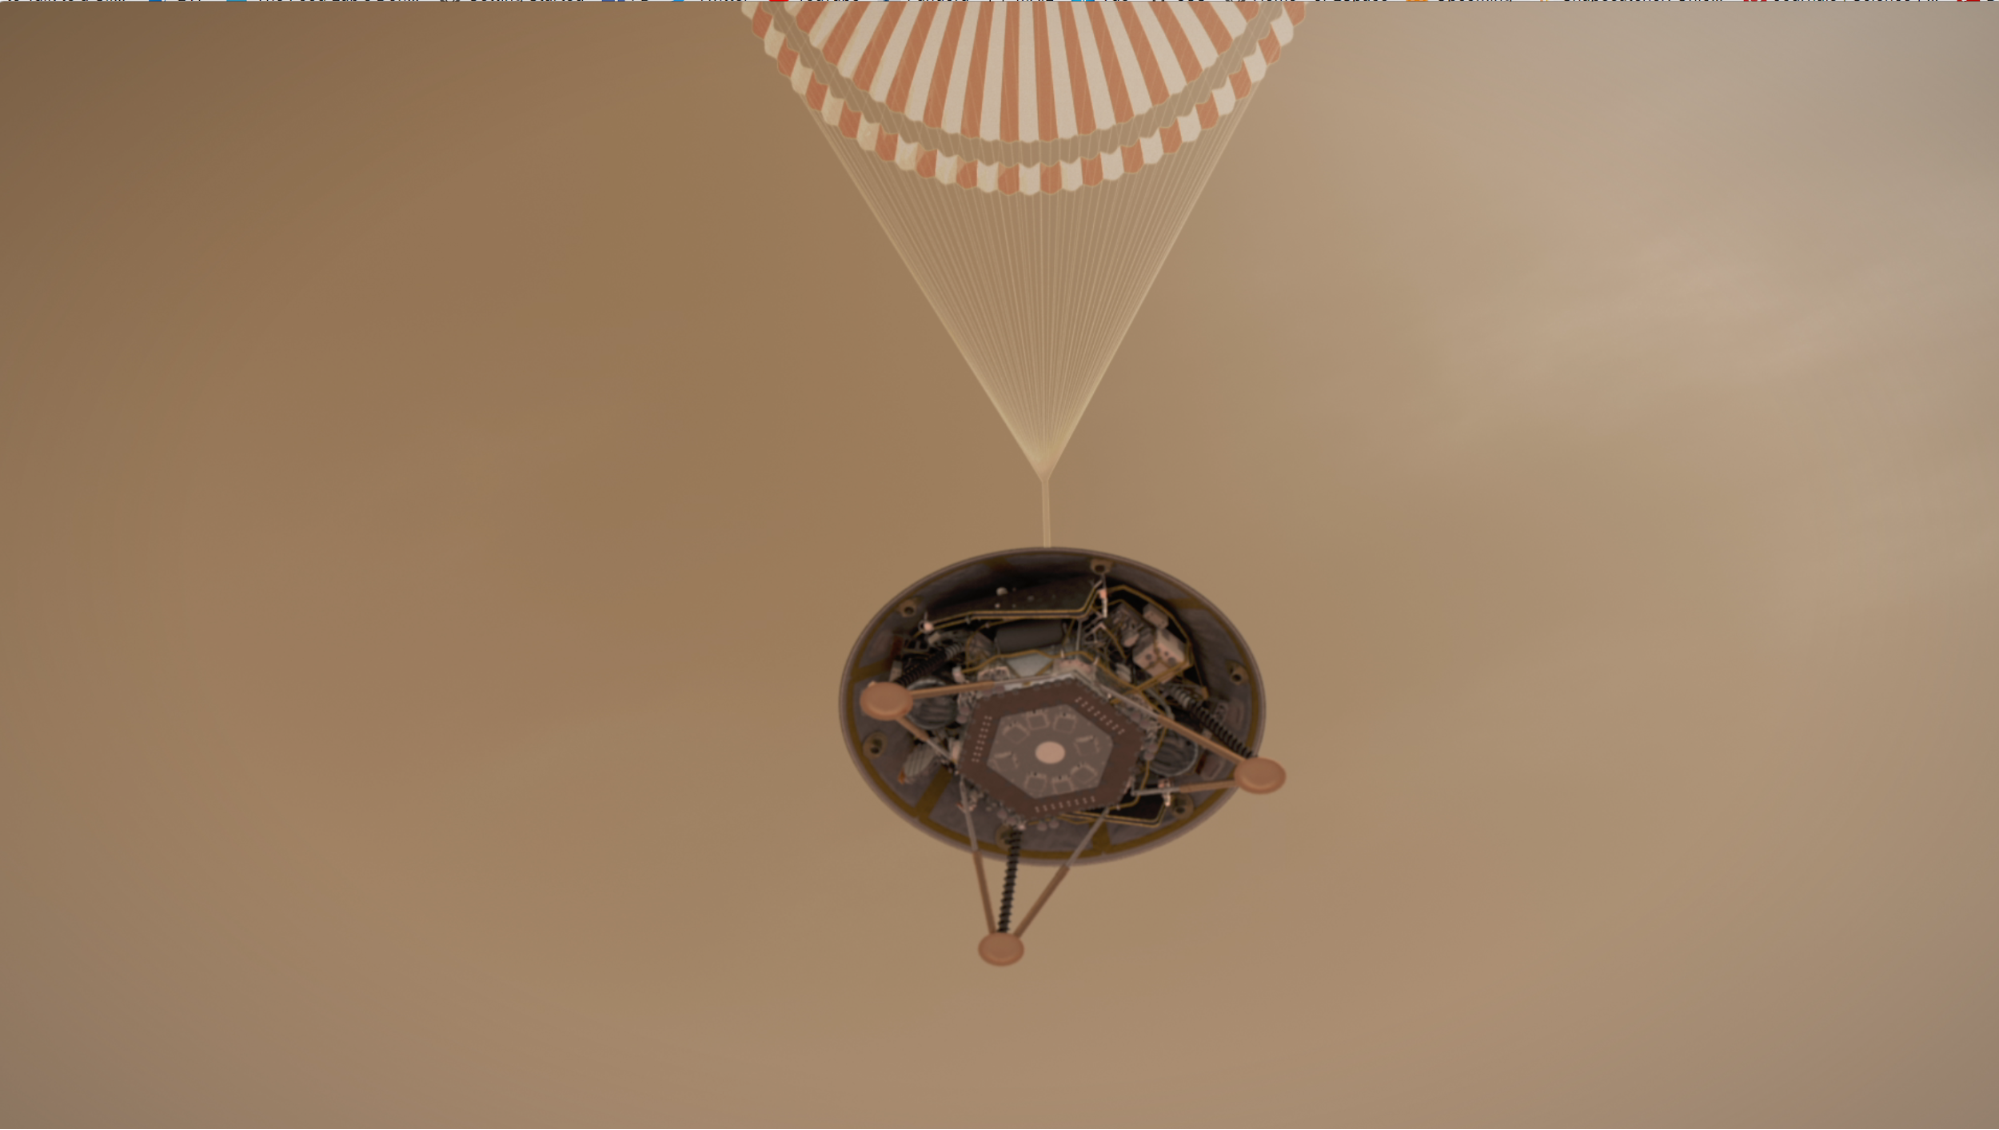 Artist concept of Insight Lander with open parachute approaching Mars surface